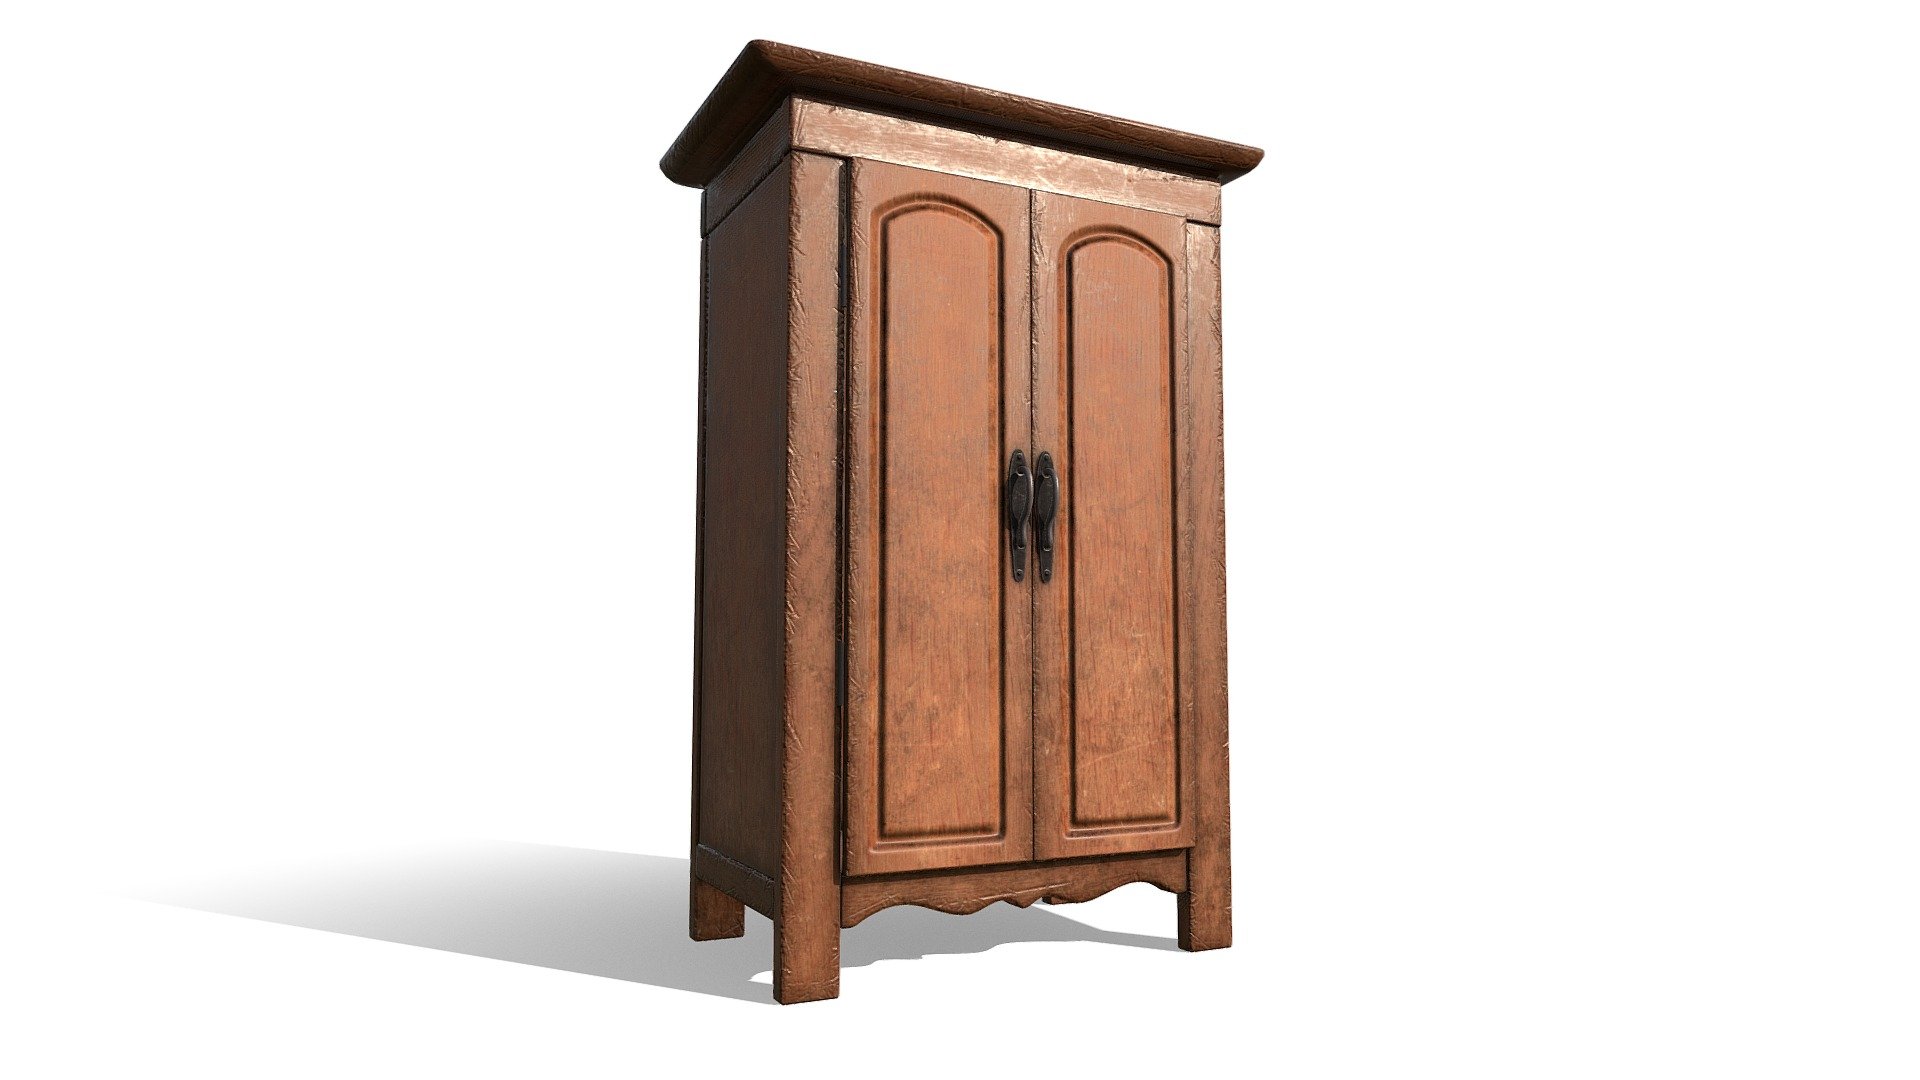 Based on the Half-Life 2 wardrobe model

Fully textured interior, with doors as separate objects allowing for easy opening / closing animation

Modeled in Blender, textured in Substance Painter - Antique Wooden Wardrobe - Download Free 3D model by Kuutti Siitonen (@kuuttisiitonen) 3d model